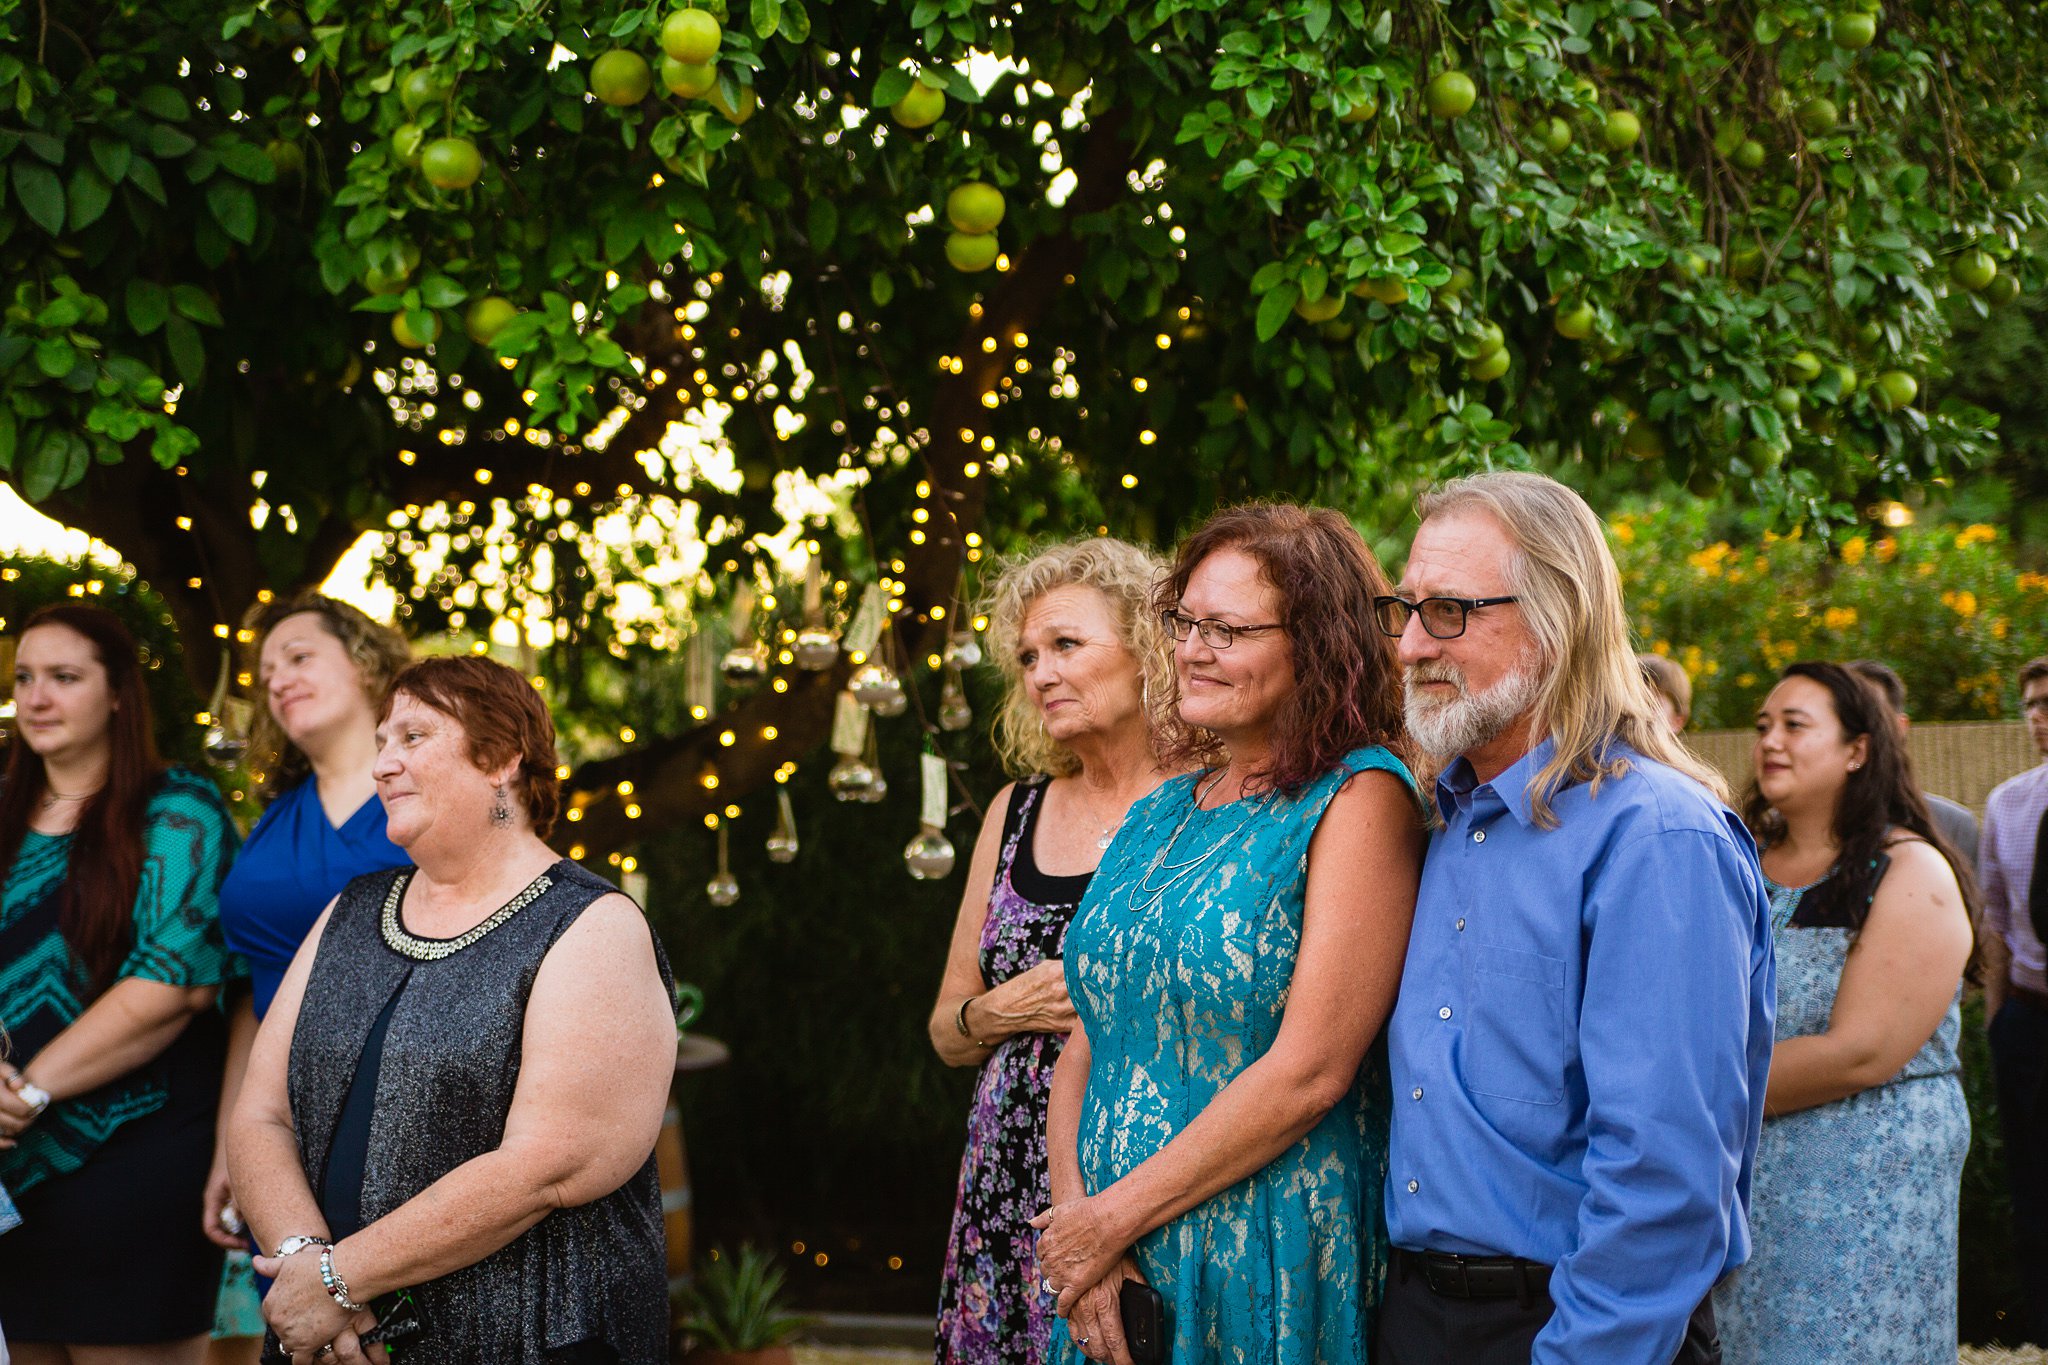 Bride and groom's parents watch as their children get married in an Arizona backyard garden wedding by PMA Photography.